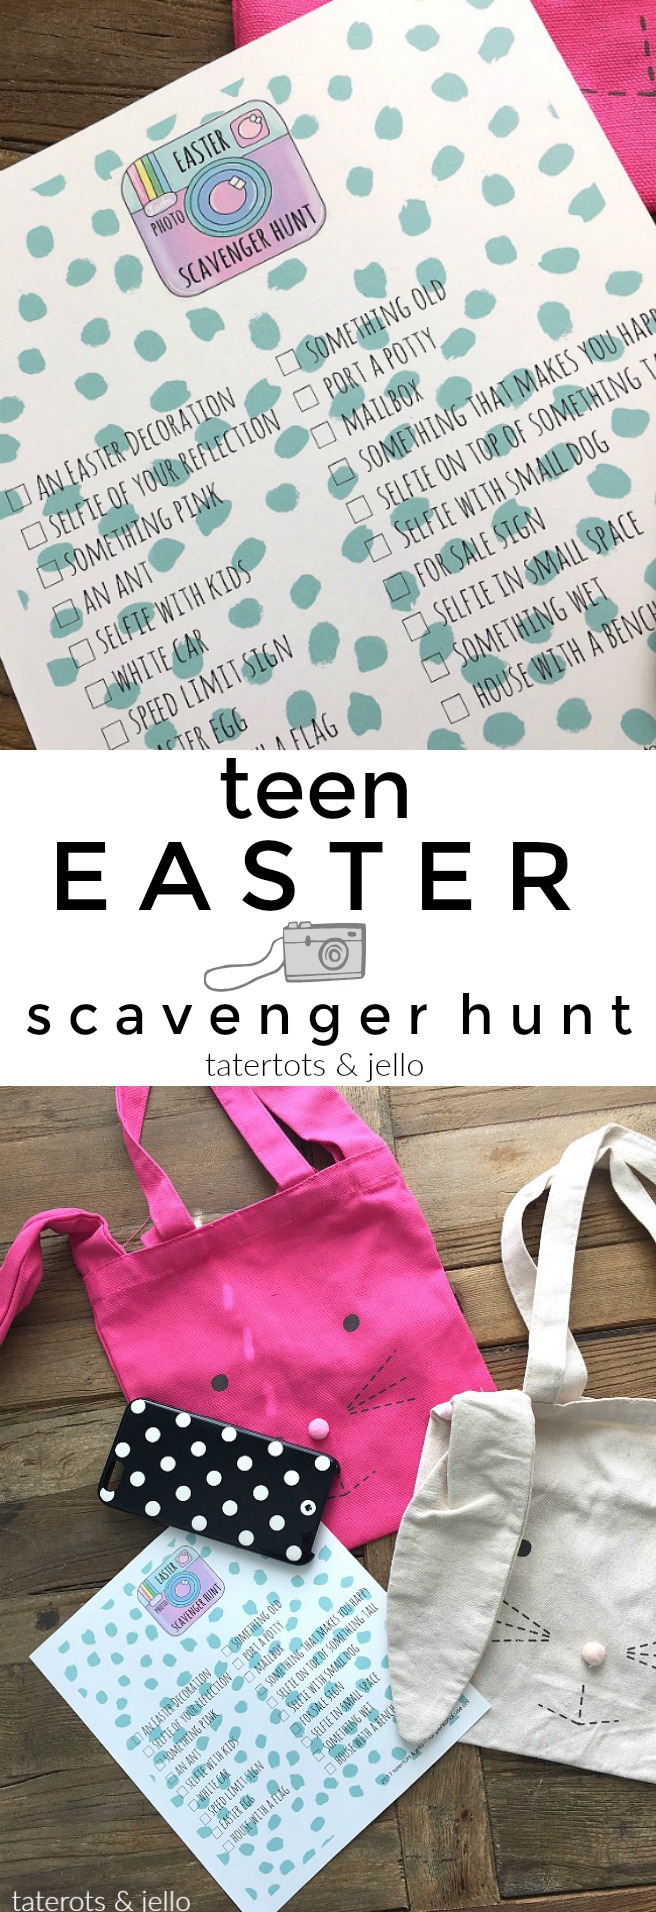 Easter Photo Scavenger Hunt game and printable checklist. Teens love easter fun too! Have them find clues on their phones in the neighborhood with this fun idea and printable!